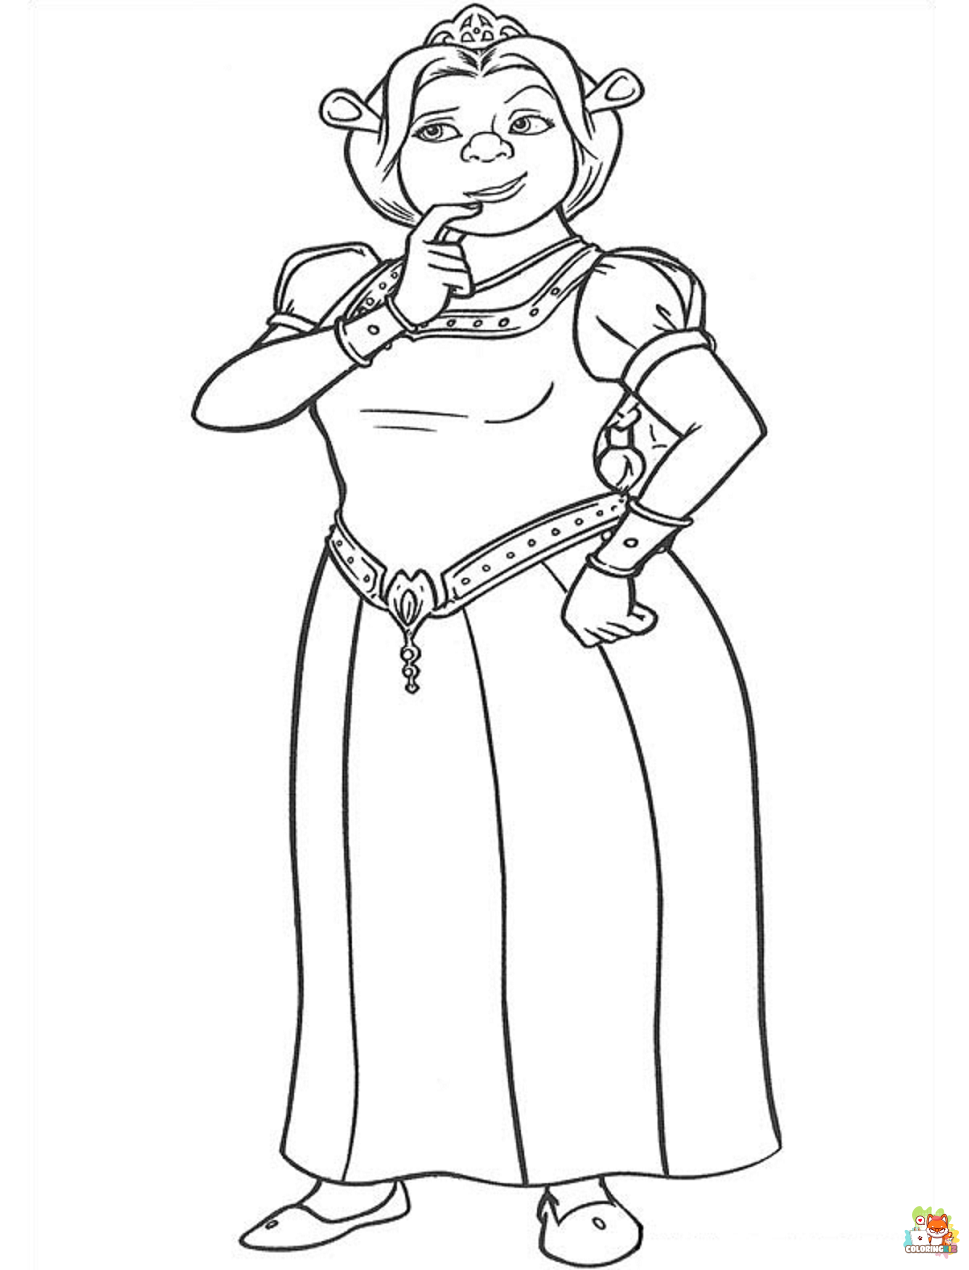 Princess Fiona Coloring Pages 2 1